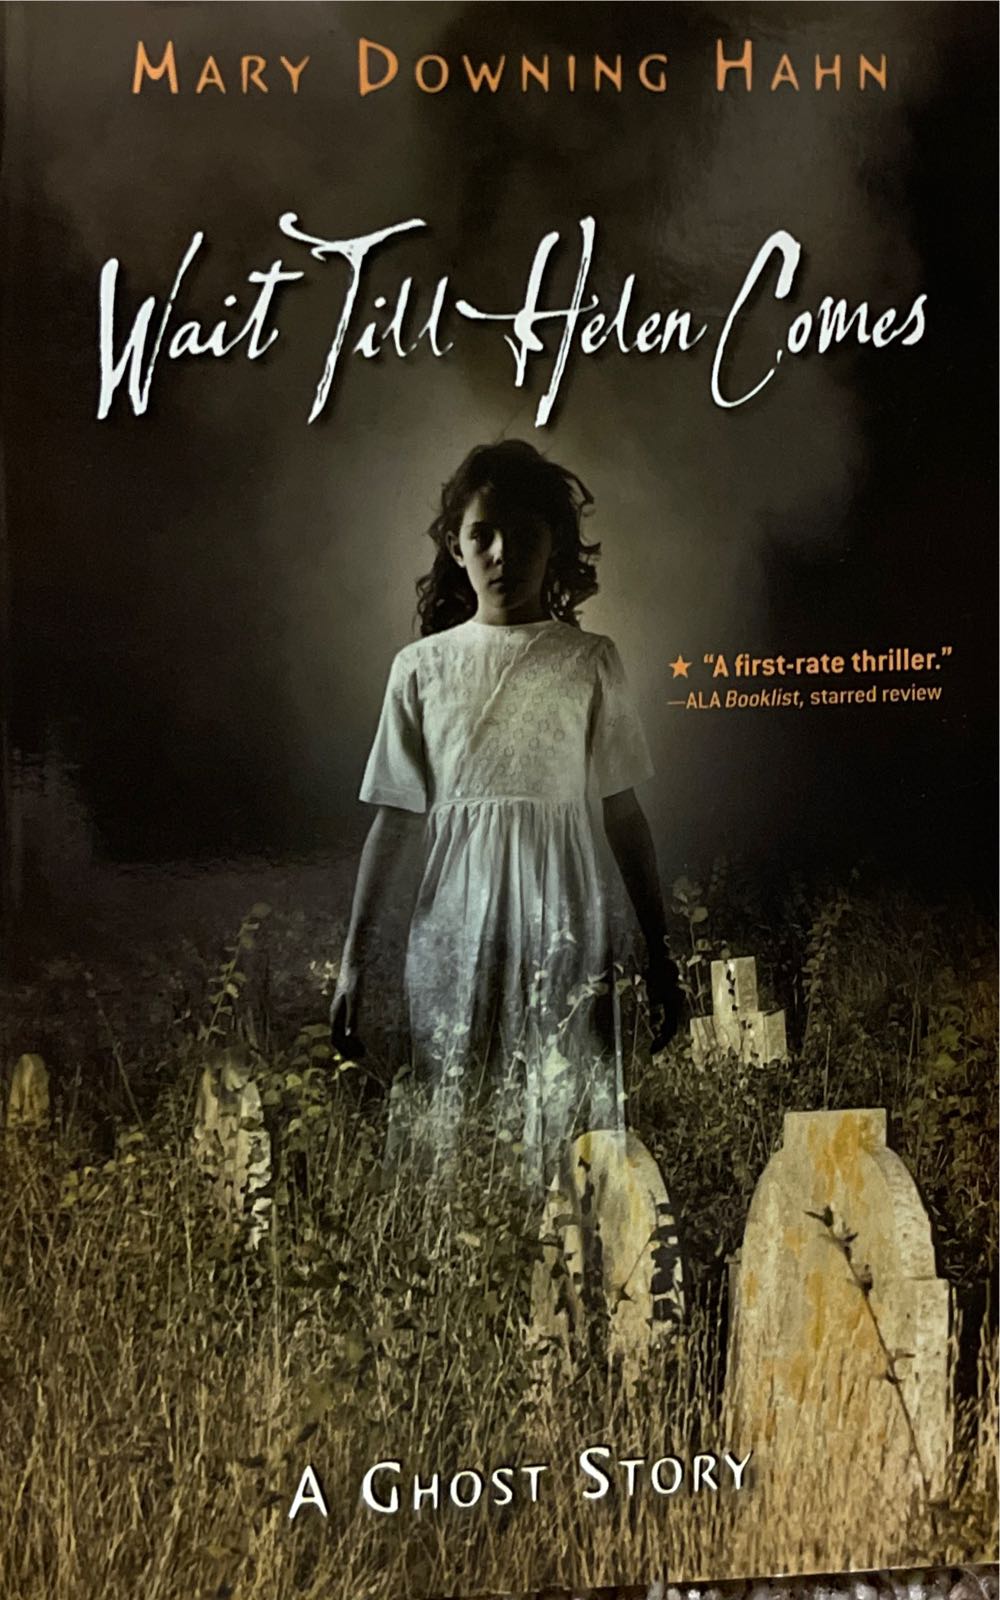 Wait Till Helen Comes - Mary Downing Hahn (Houghton Mifflin Harcourt) book collectible [Barcode 9780899194530] - Main Image 2